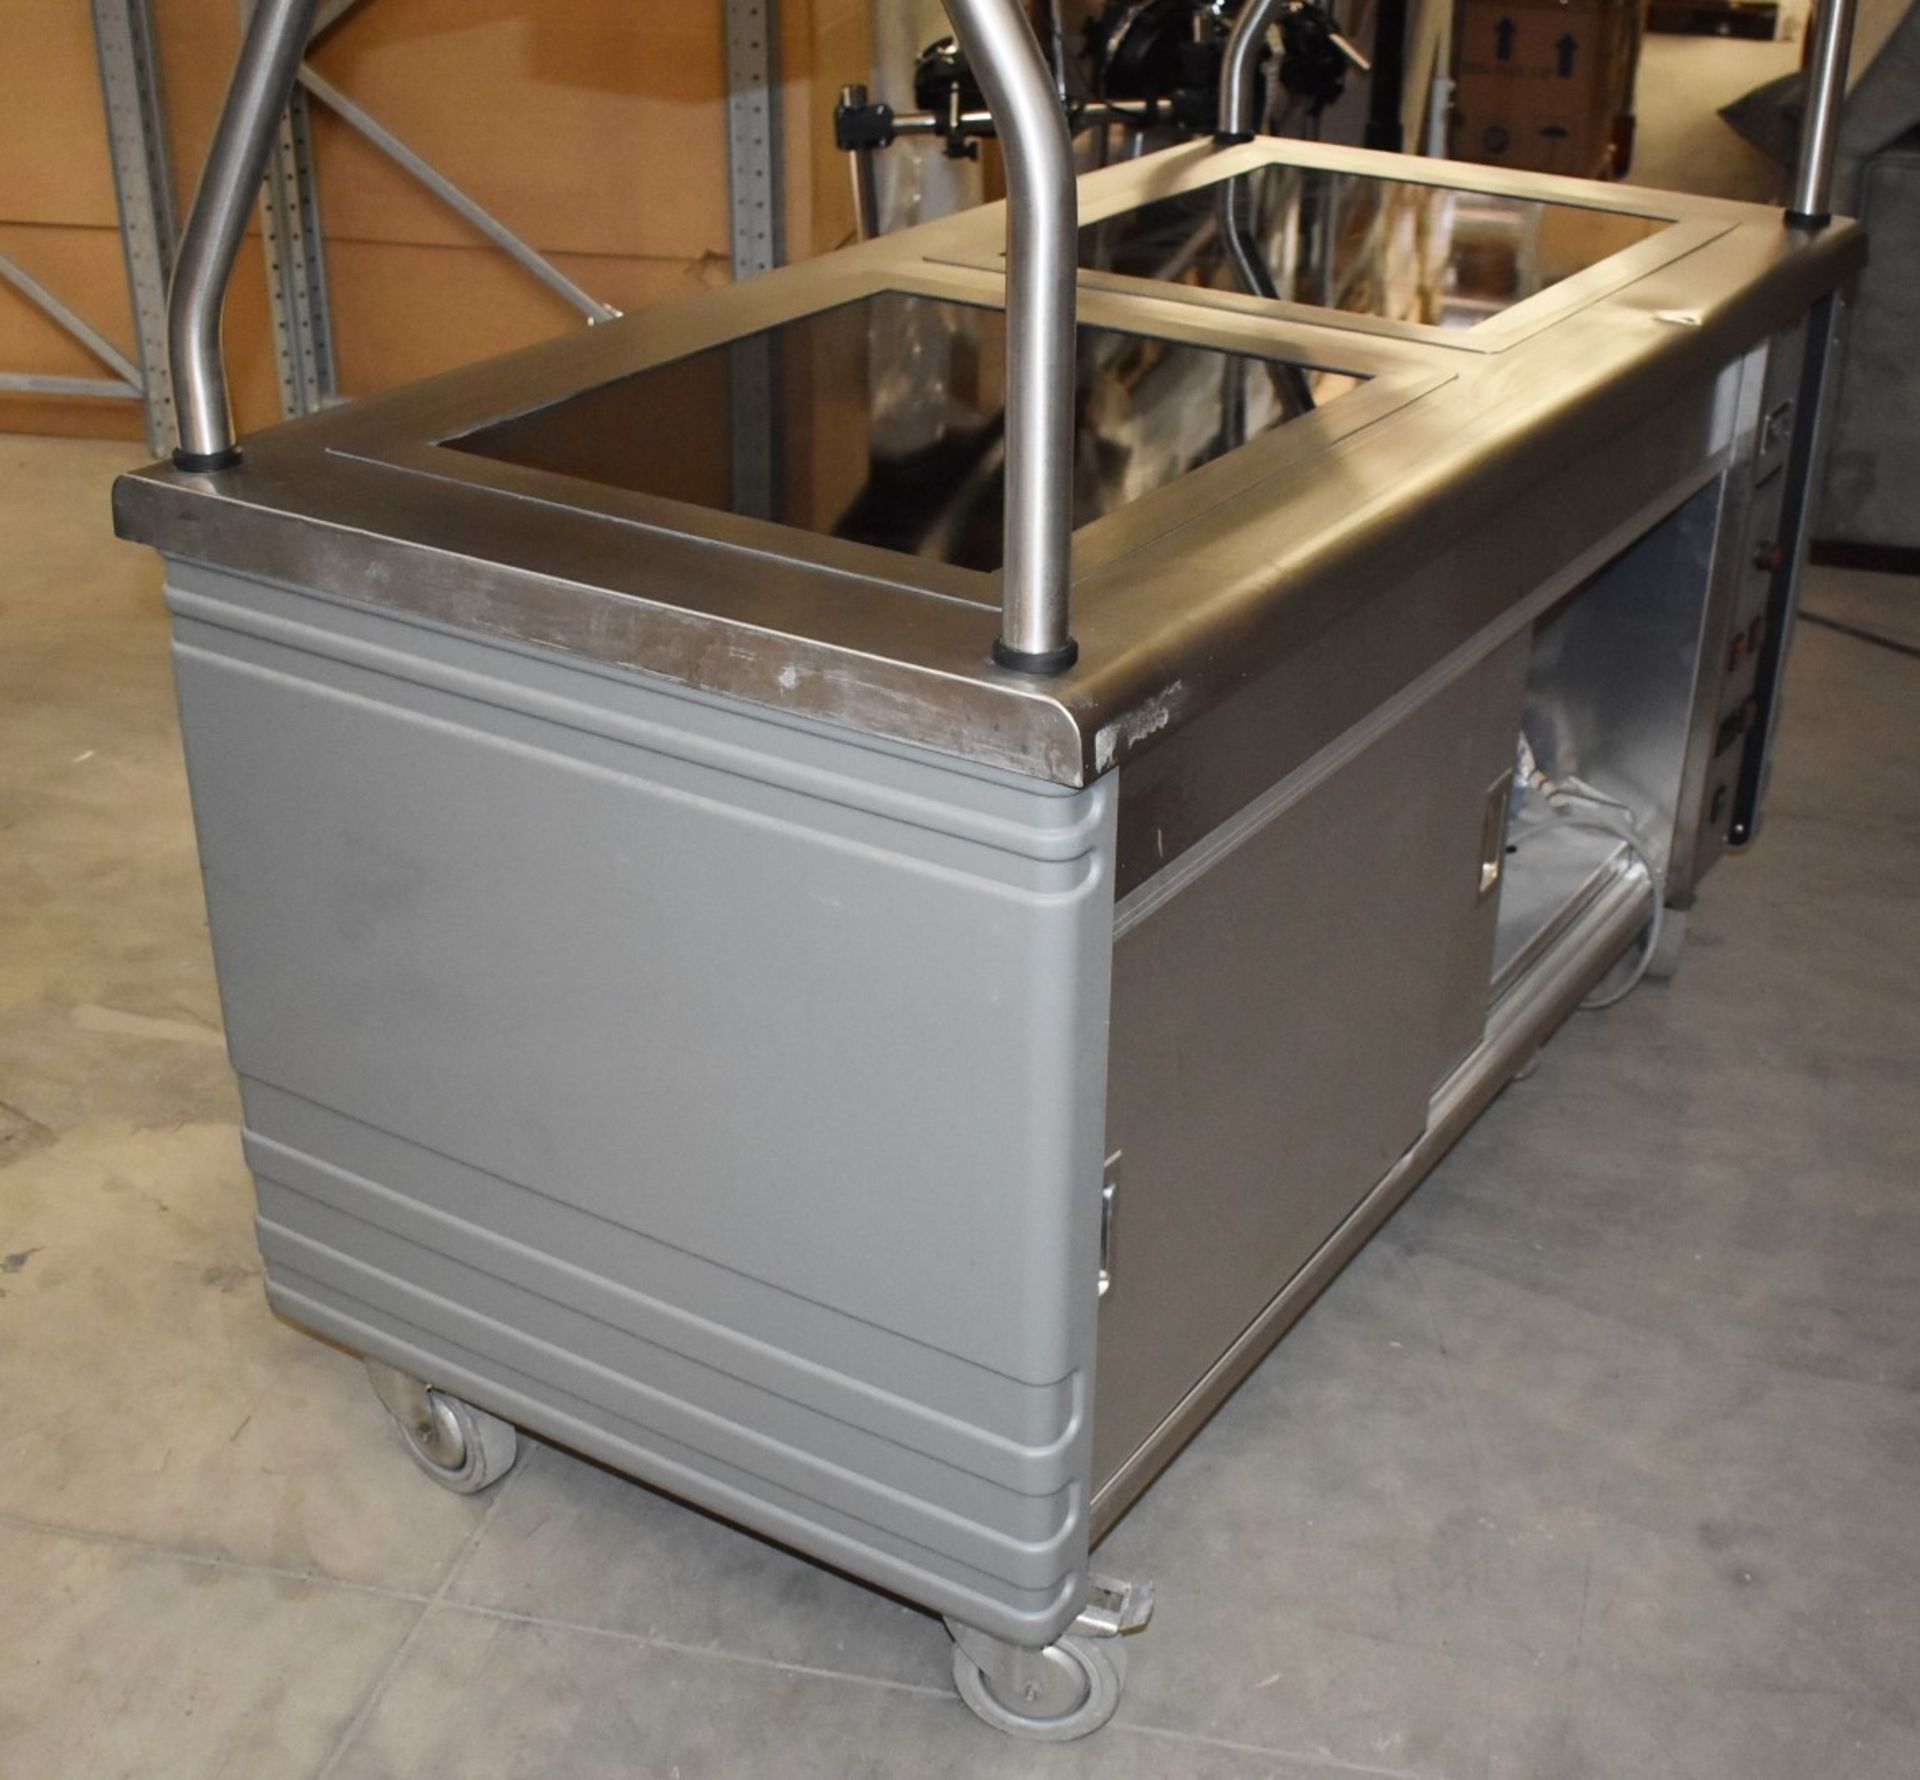 1 x Grundy Commercial Carvery Unit With Twin Hot Plates, Overhead Warmer and Plate Warming Cabinet - Image 15 of 21